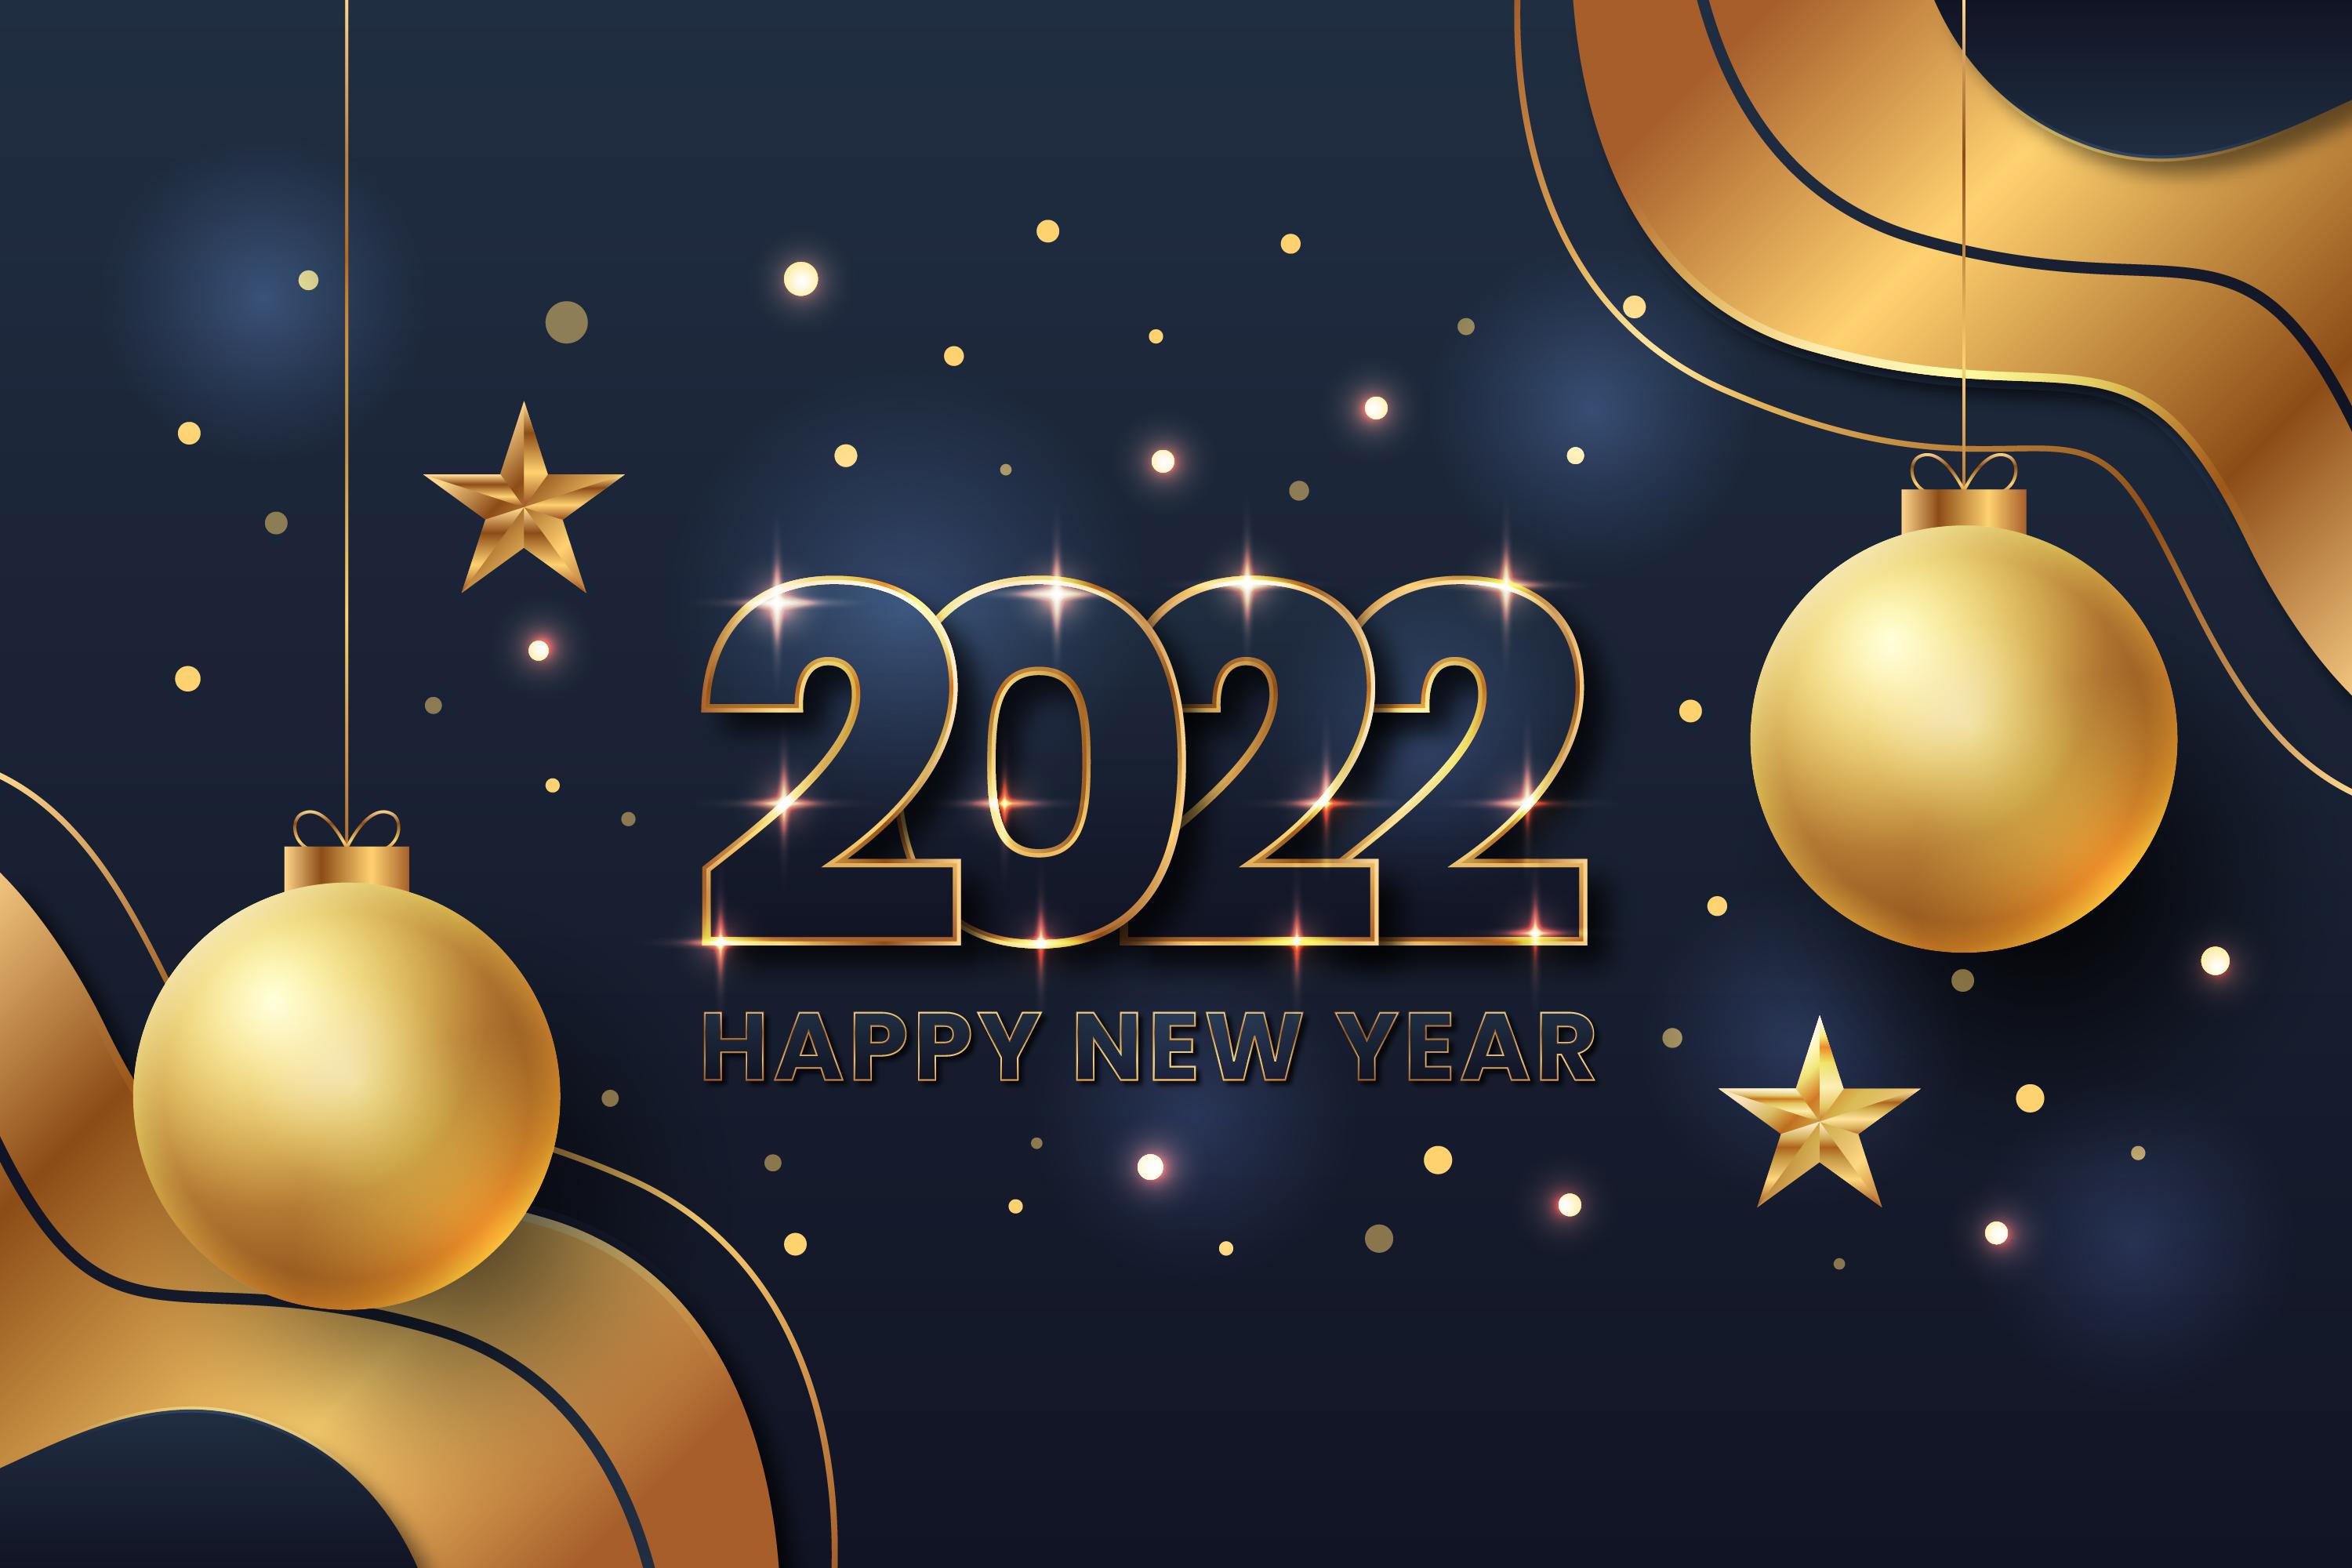 Happy New Year 2022 Background Wallpaper 